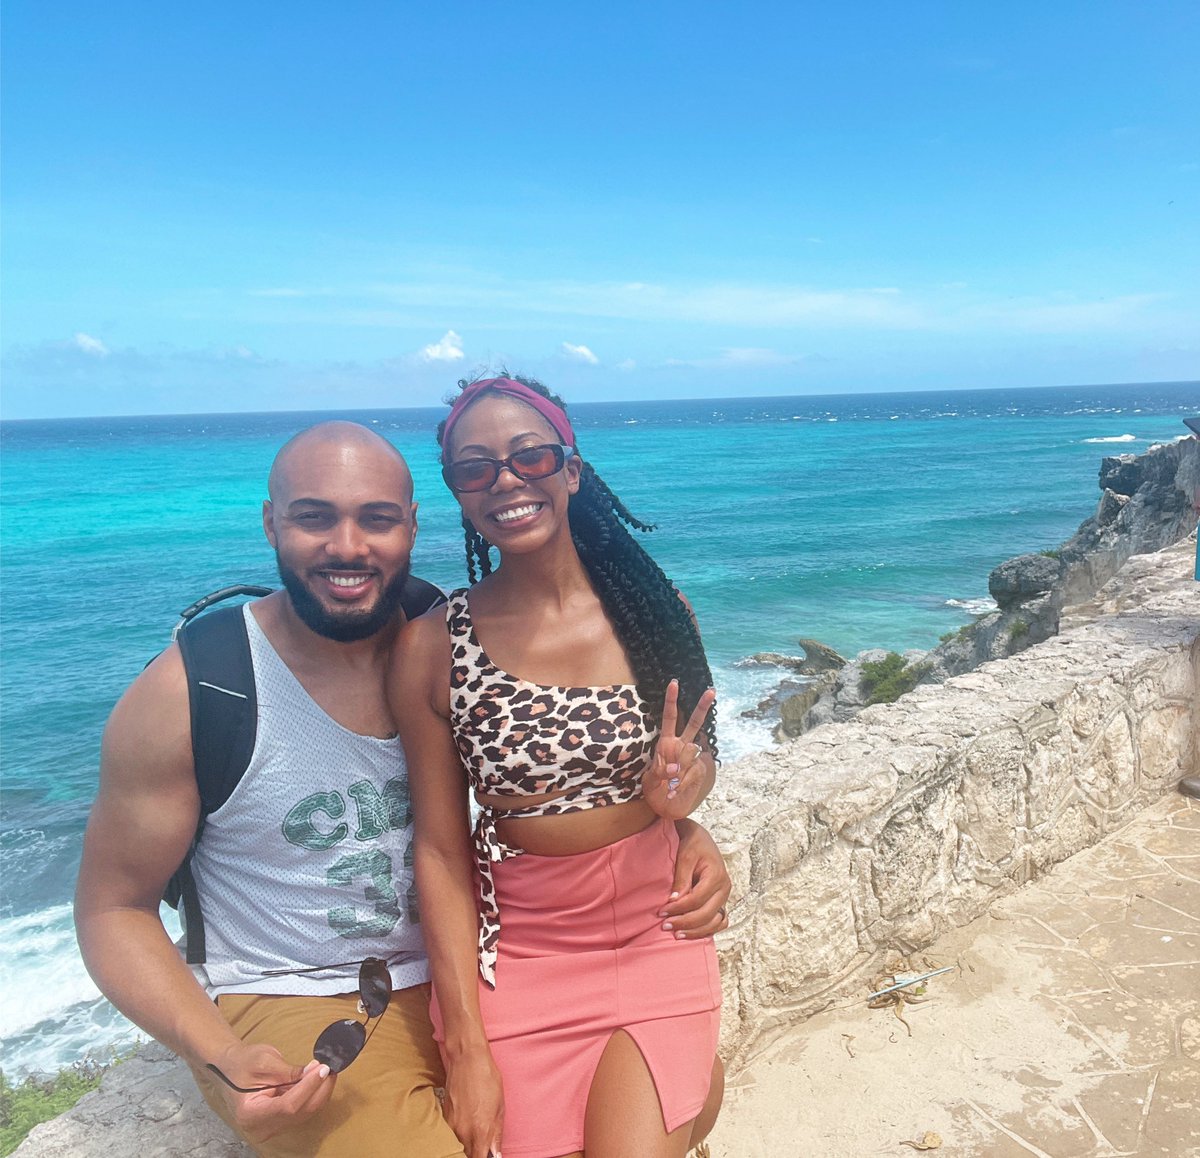 We have a new episode out! We got to experience an amazing island about 36 km from Cancun! Traveling While Black™: Episode 112- Isla Mujeres, Mexico
youtu.be/_9KSMvSh6Oc #travelingwhileblack #blackvloggers #blacktravelvloggers